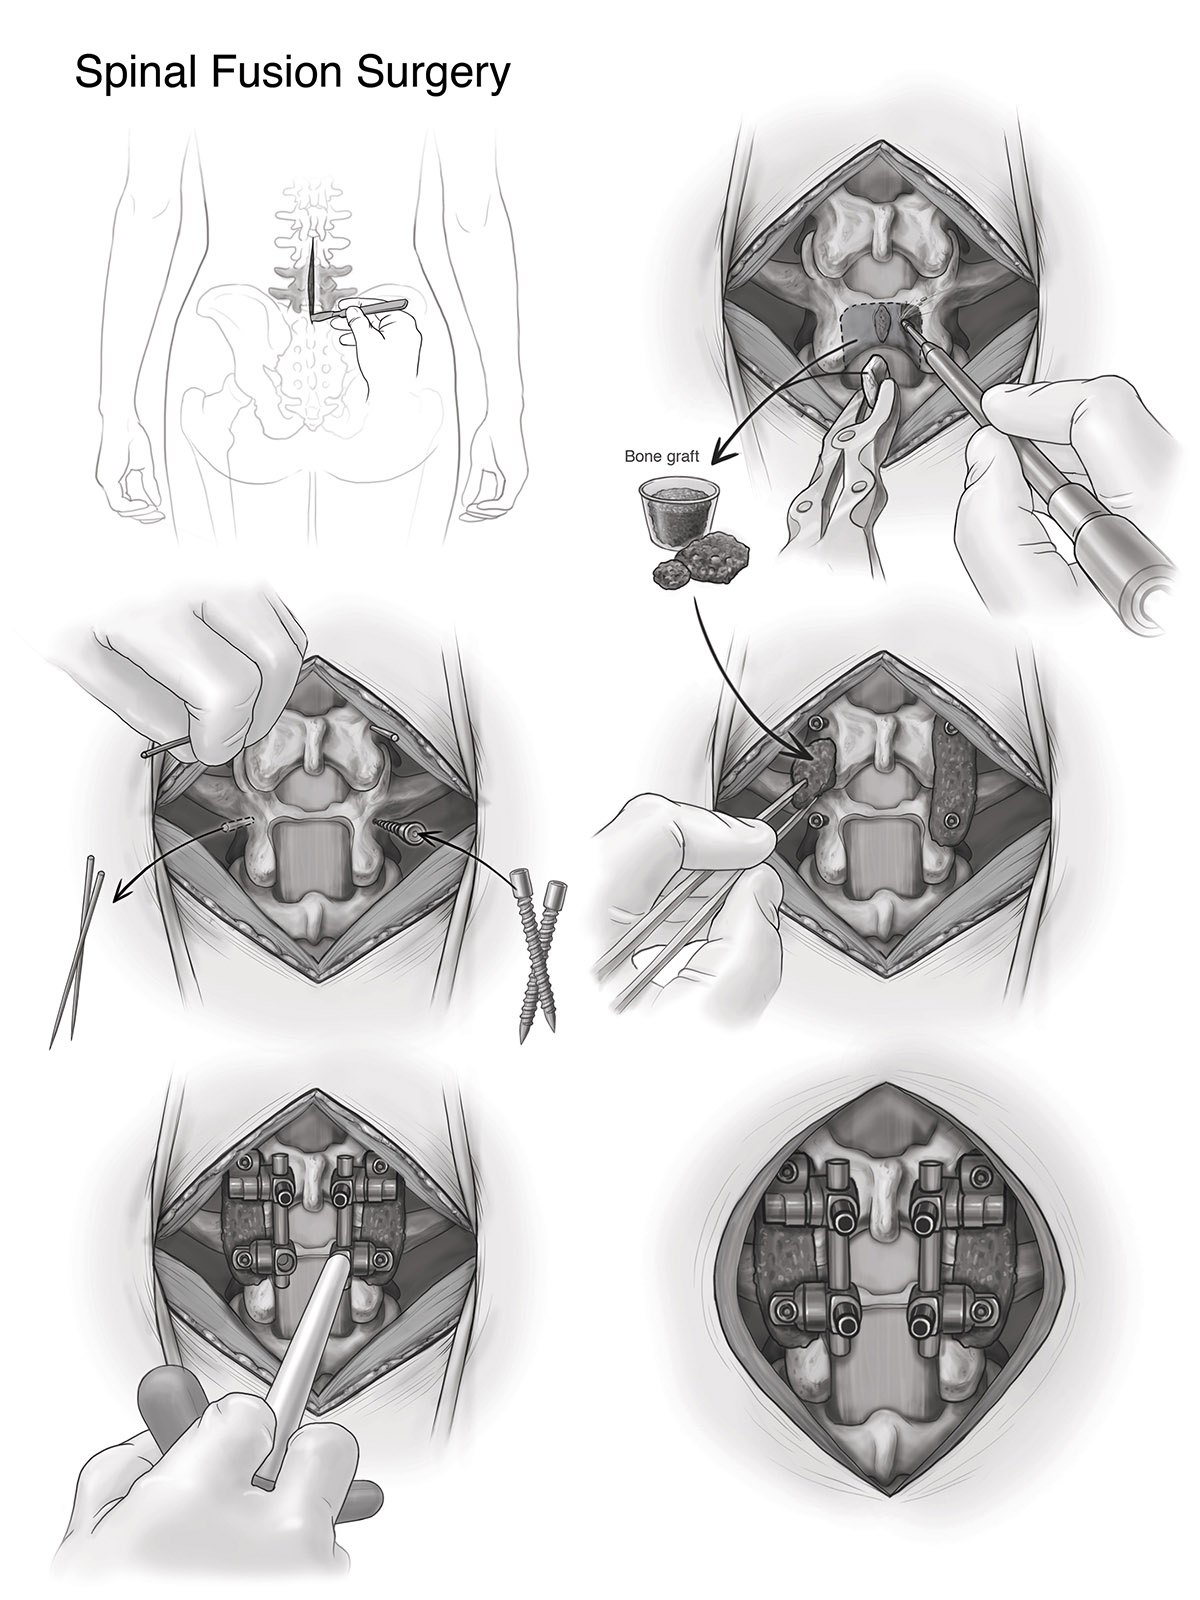 Illustration of spinal fusion surgery.